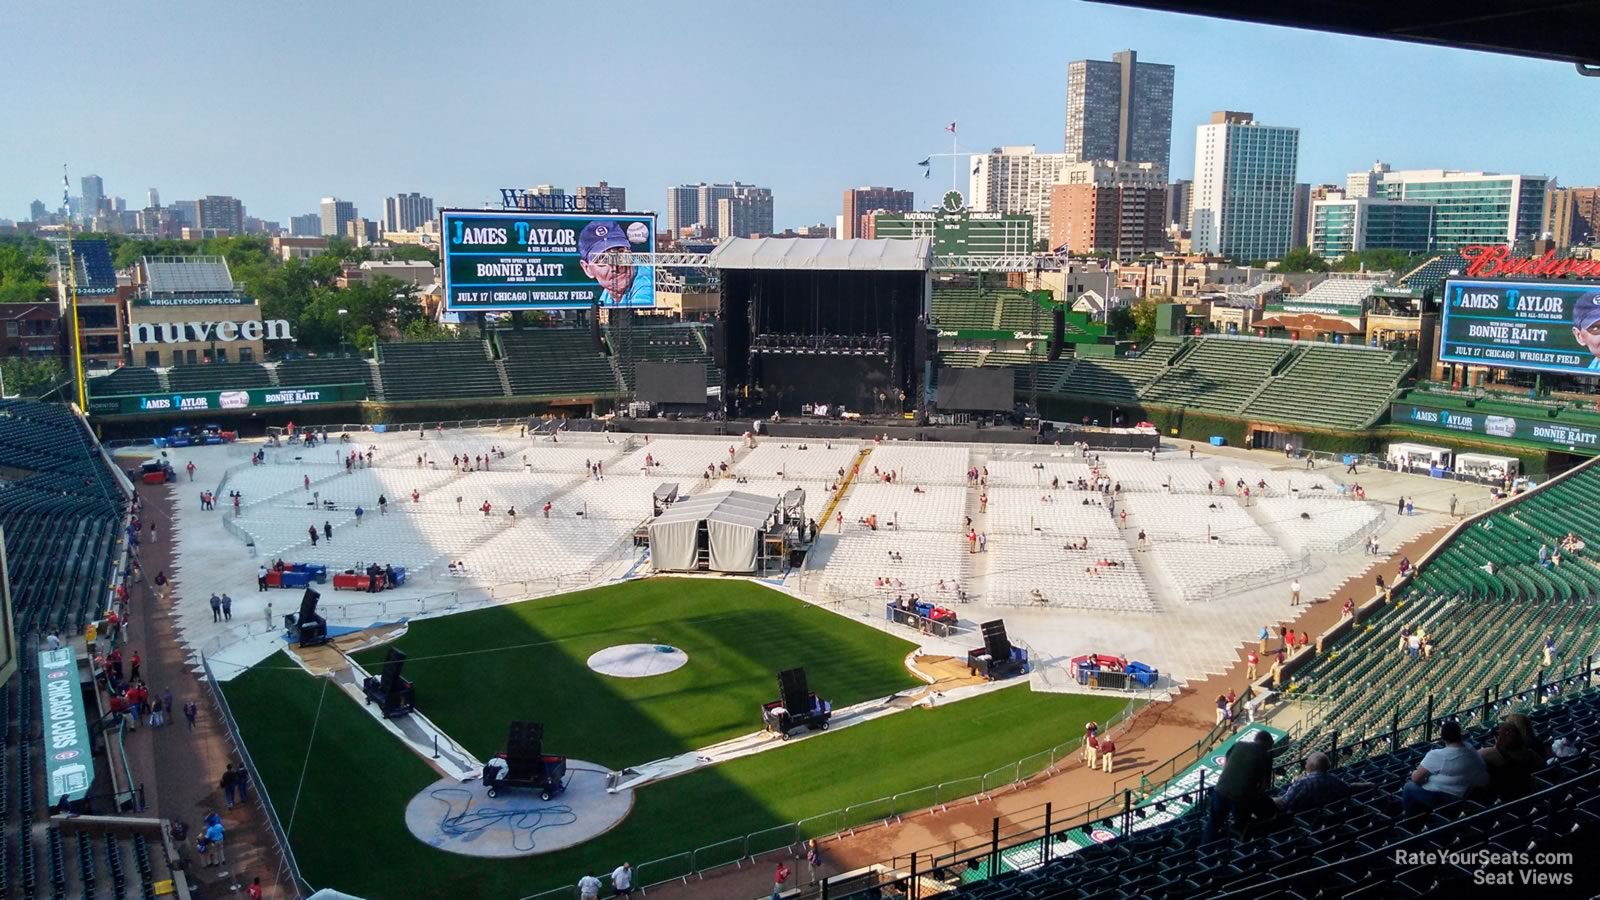 section 419, row 4 seat view  for concert - wrigley field